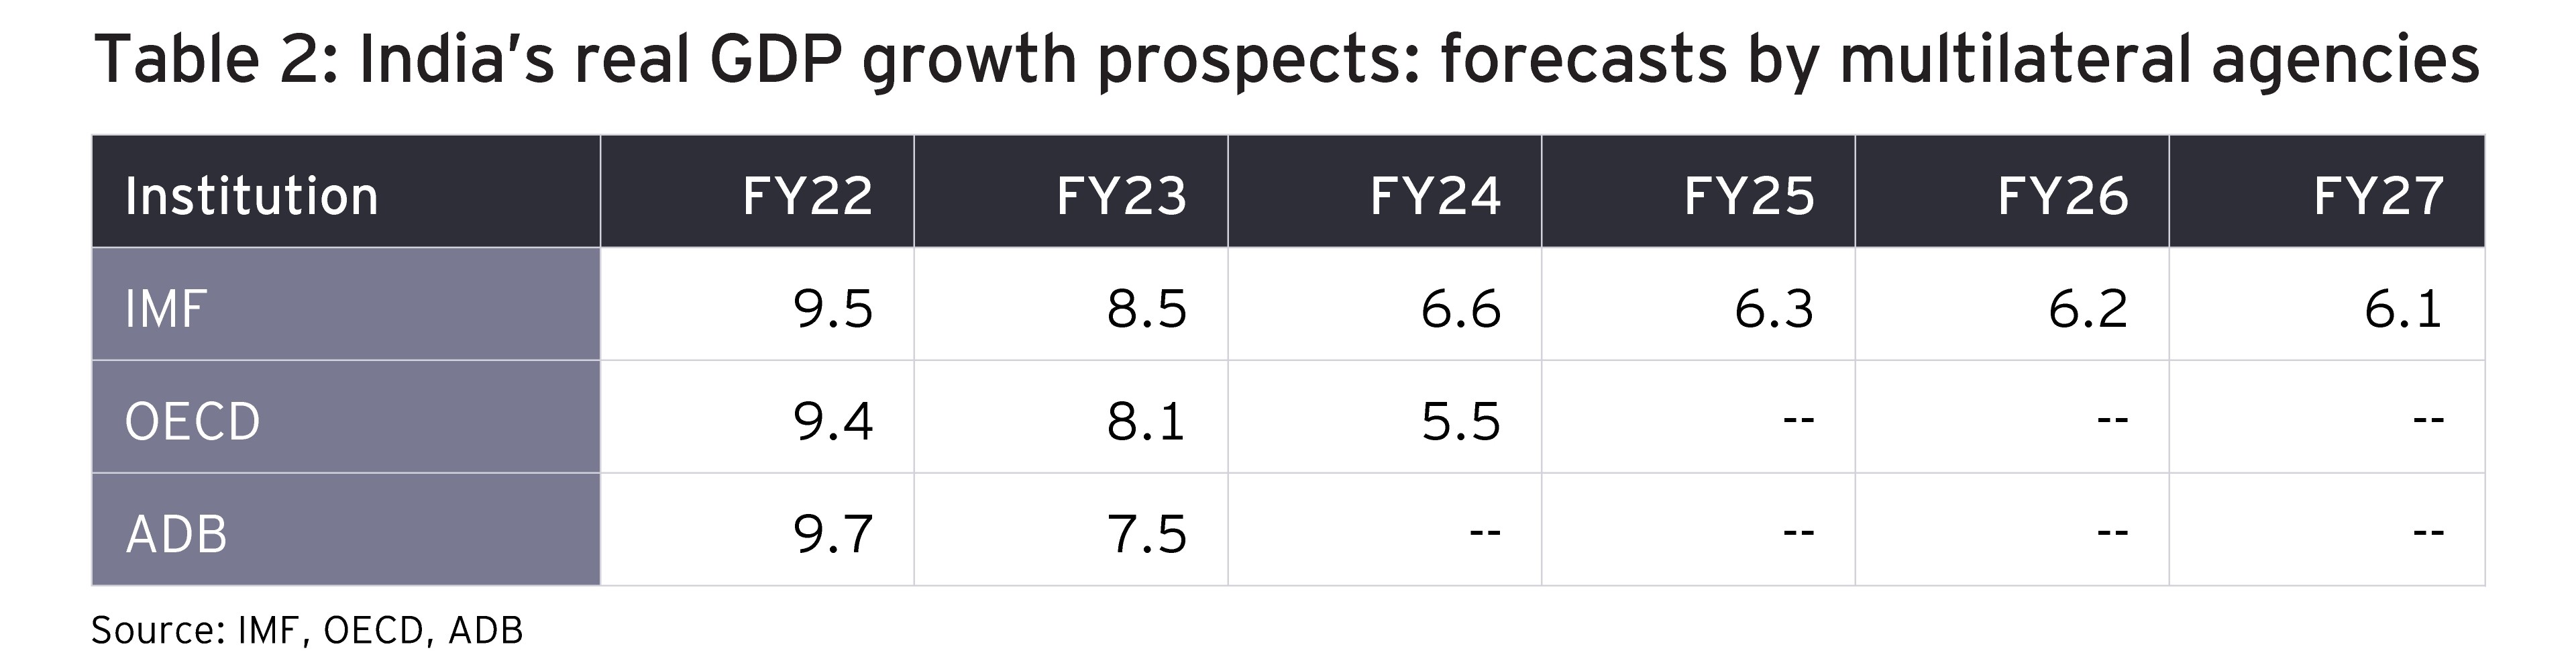 India’s real GDP growth prospects: IMF and OECD